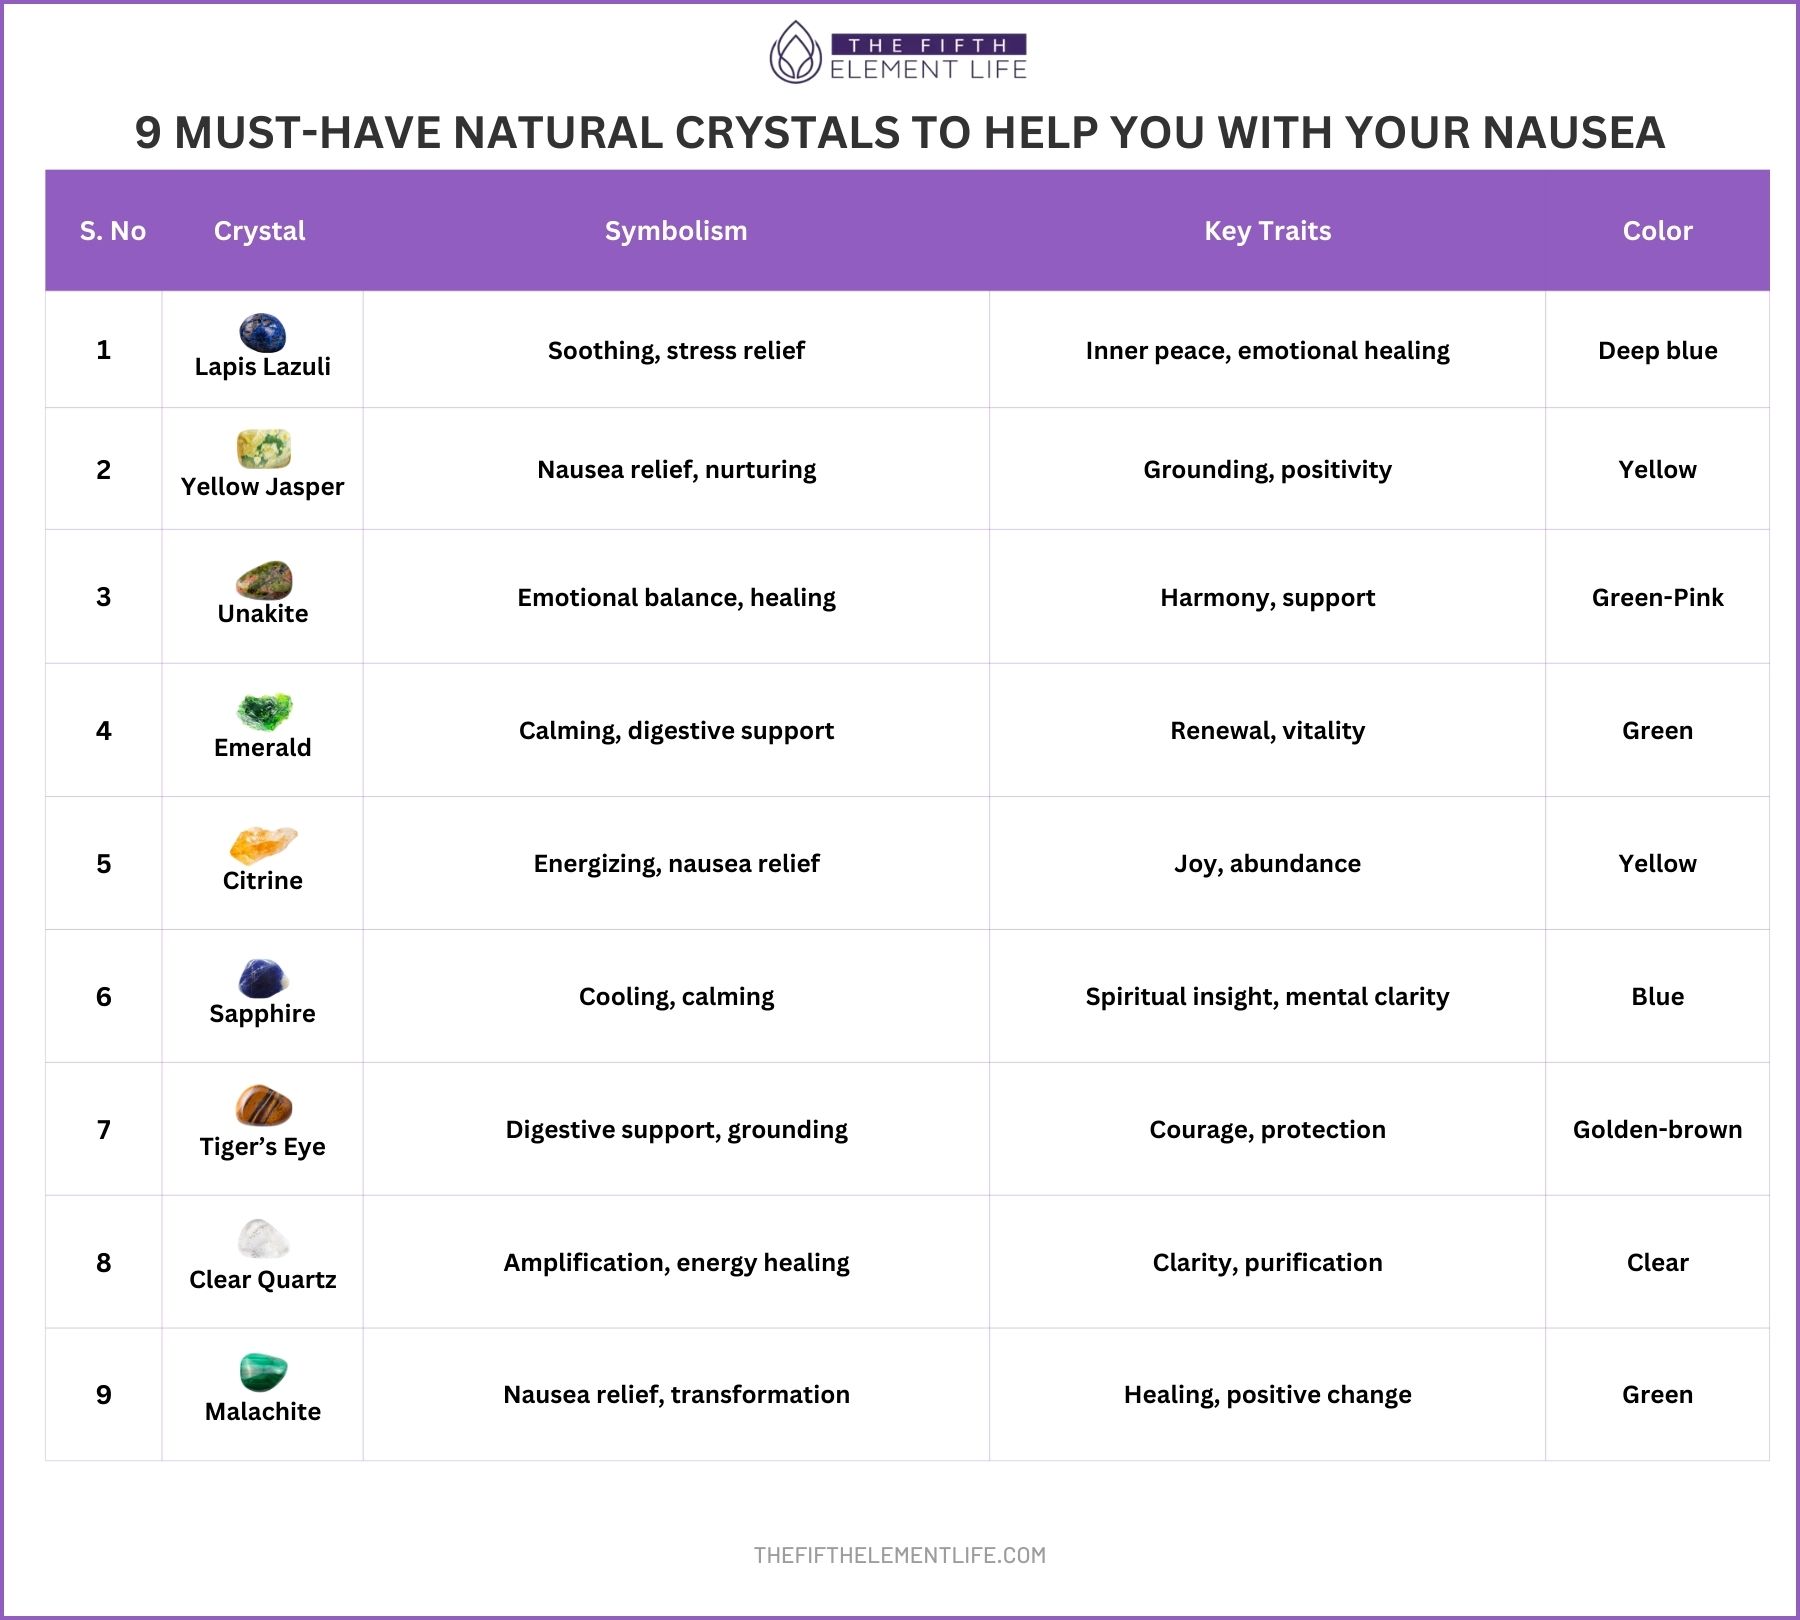 9 Must-Have Natural Crystals To Help You With Your Nausea